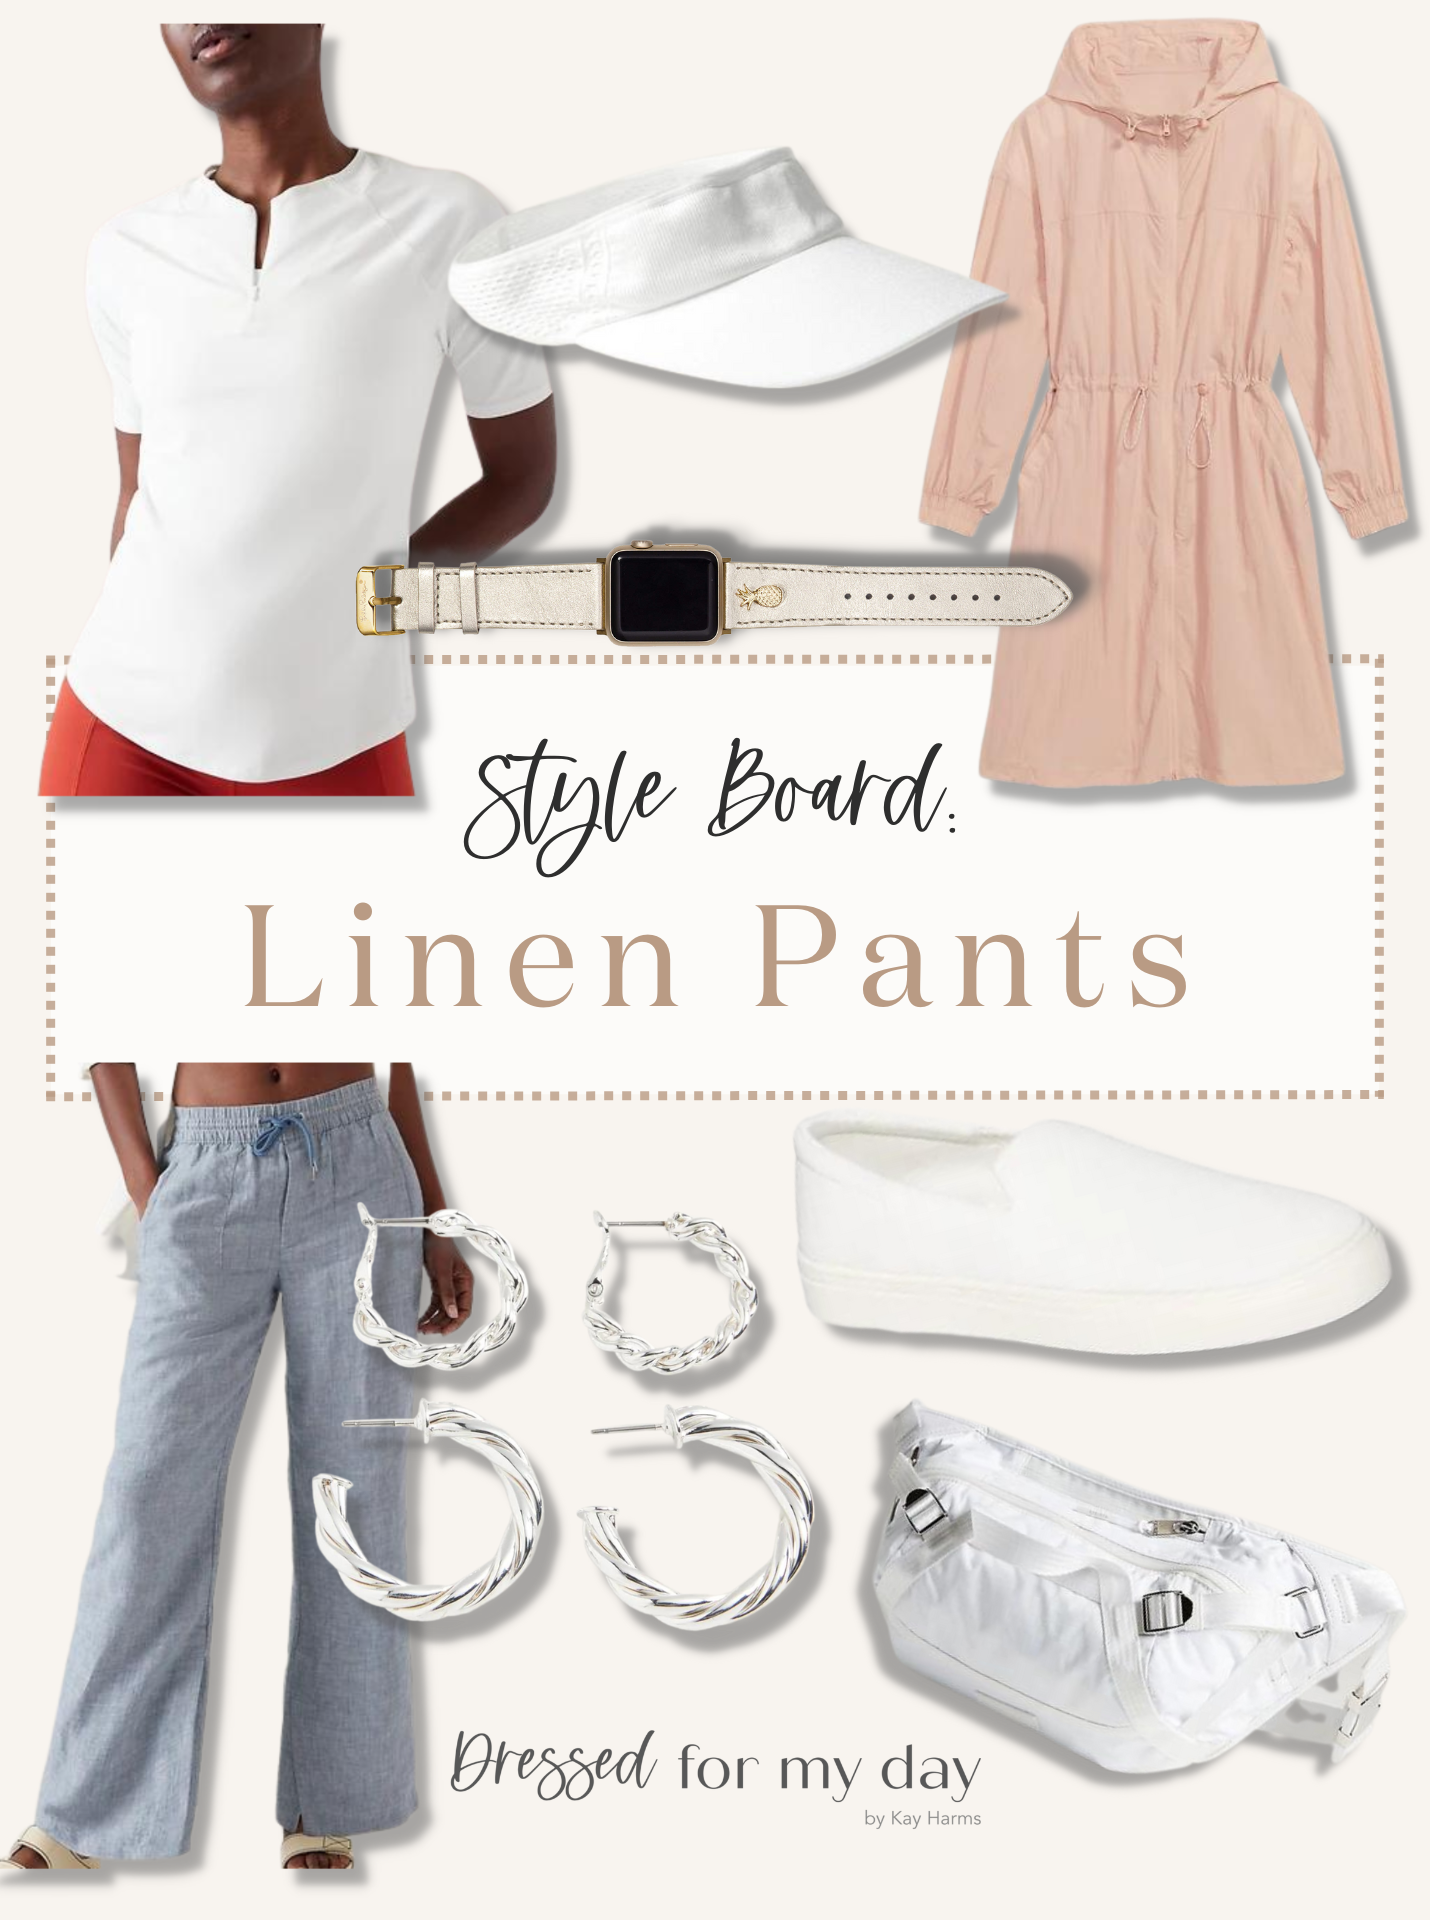 Instead of Shorts Wear Casual Linen Pants